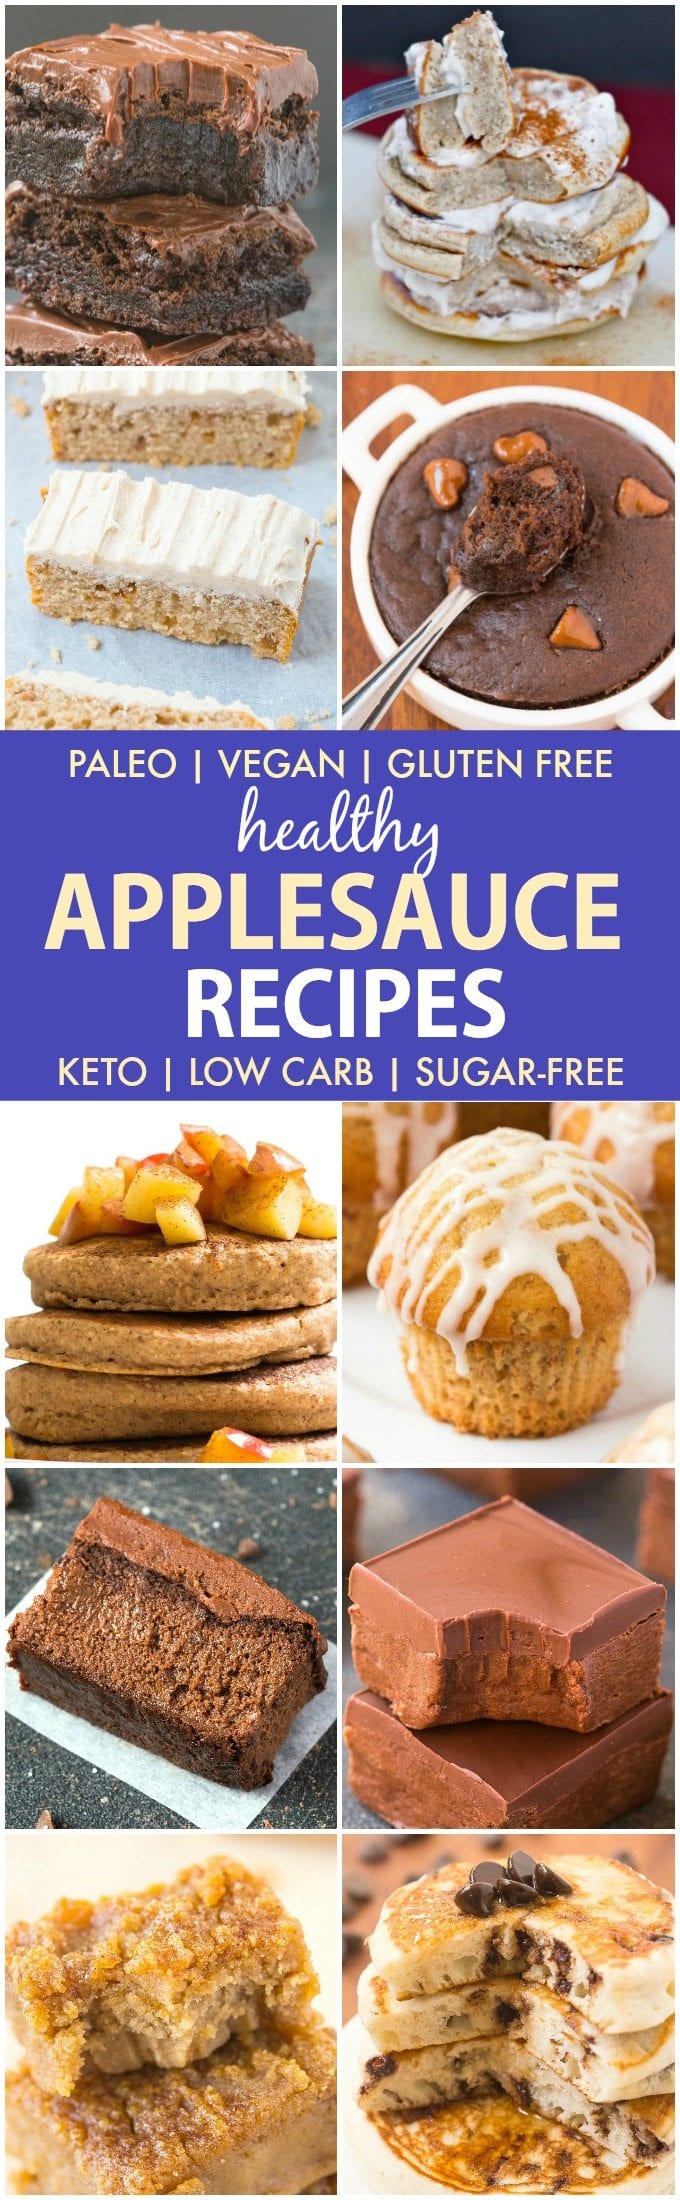 Healthy Recipes made with Applesauce (Paleo, Vegan, Gluten Free)- Easy ways to use leftover applesauce in a variety of recipes- Brownies, cakes, muffins no-bakes and more! Keto + Low Carb options too! #applesauce #healthybaking #healthy #sugarfree | Recipe on thebigmansworld.com